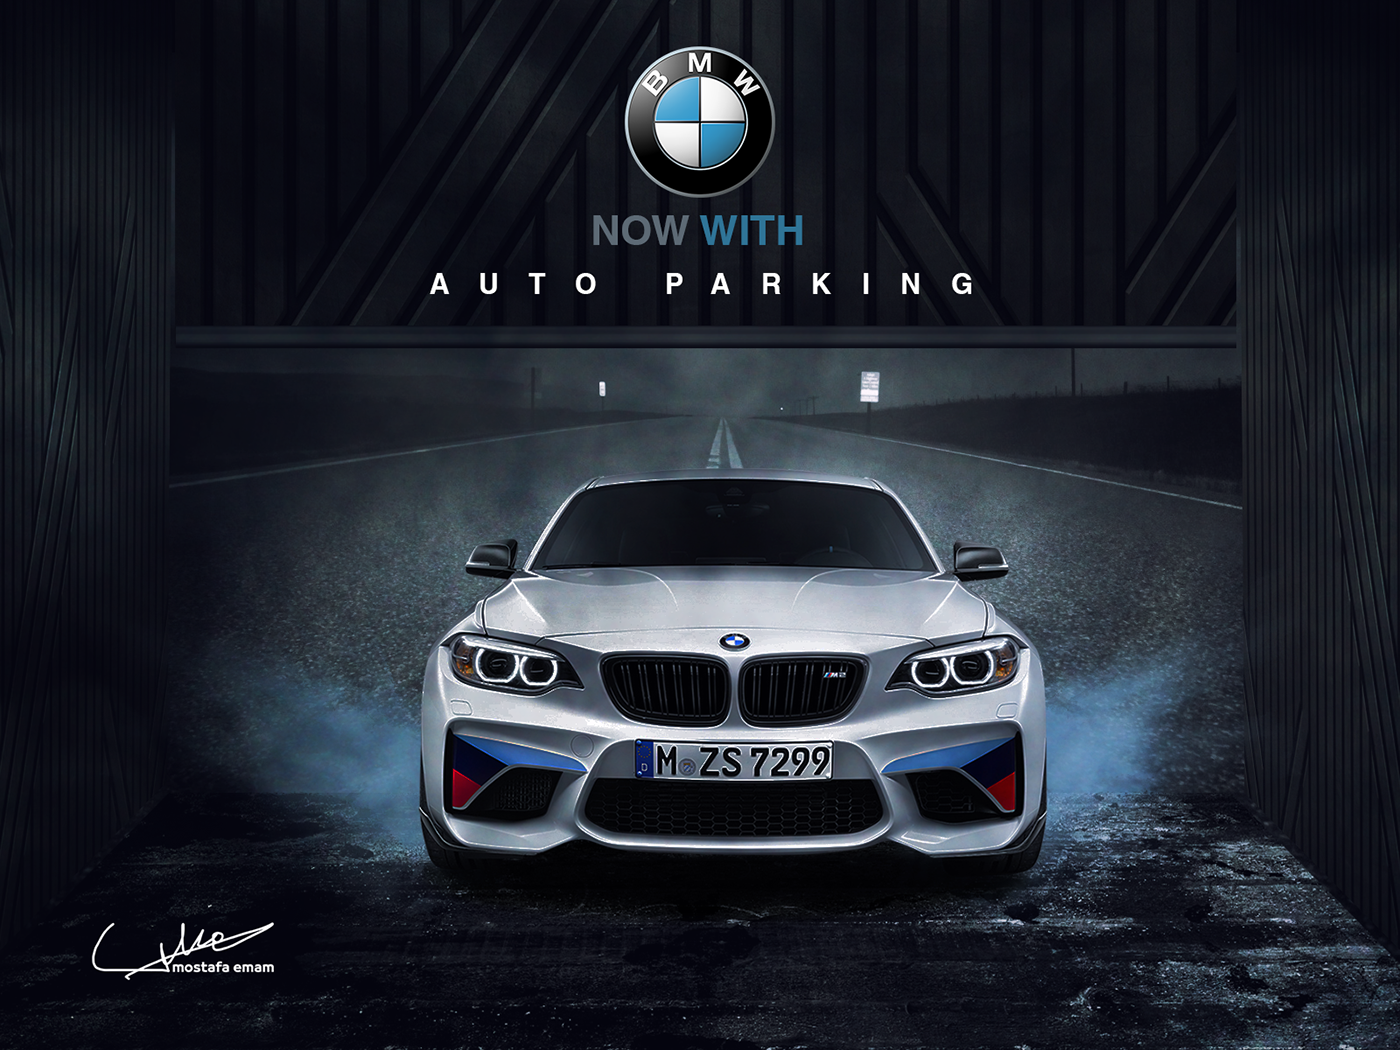 ADV graphic BMW KEEWAY motorbike egypt germany promoted car party